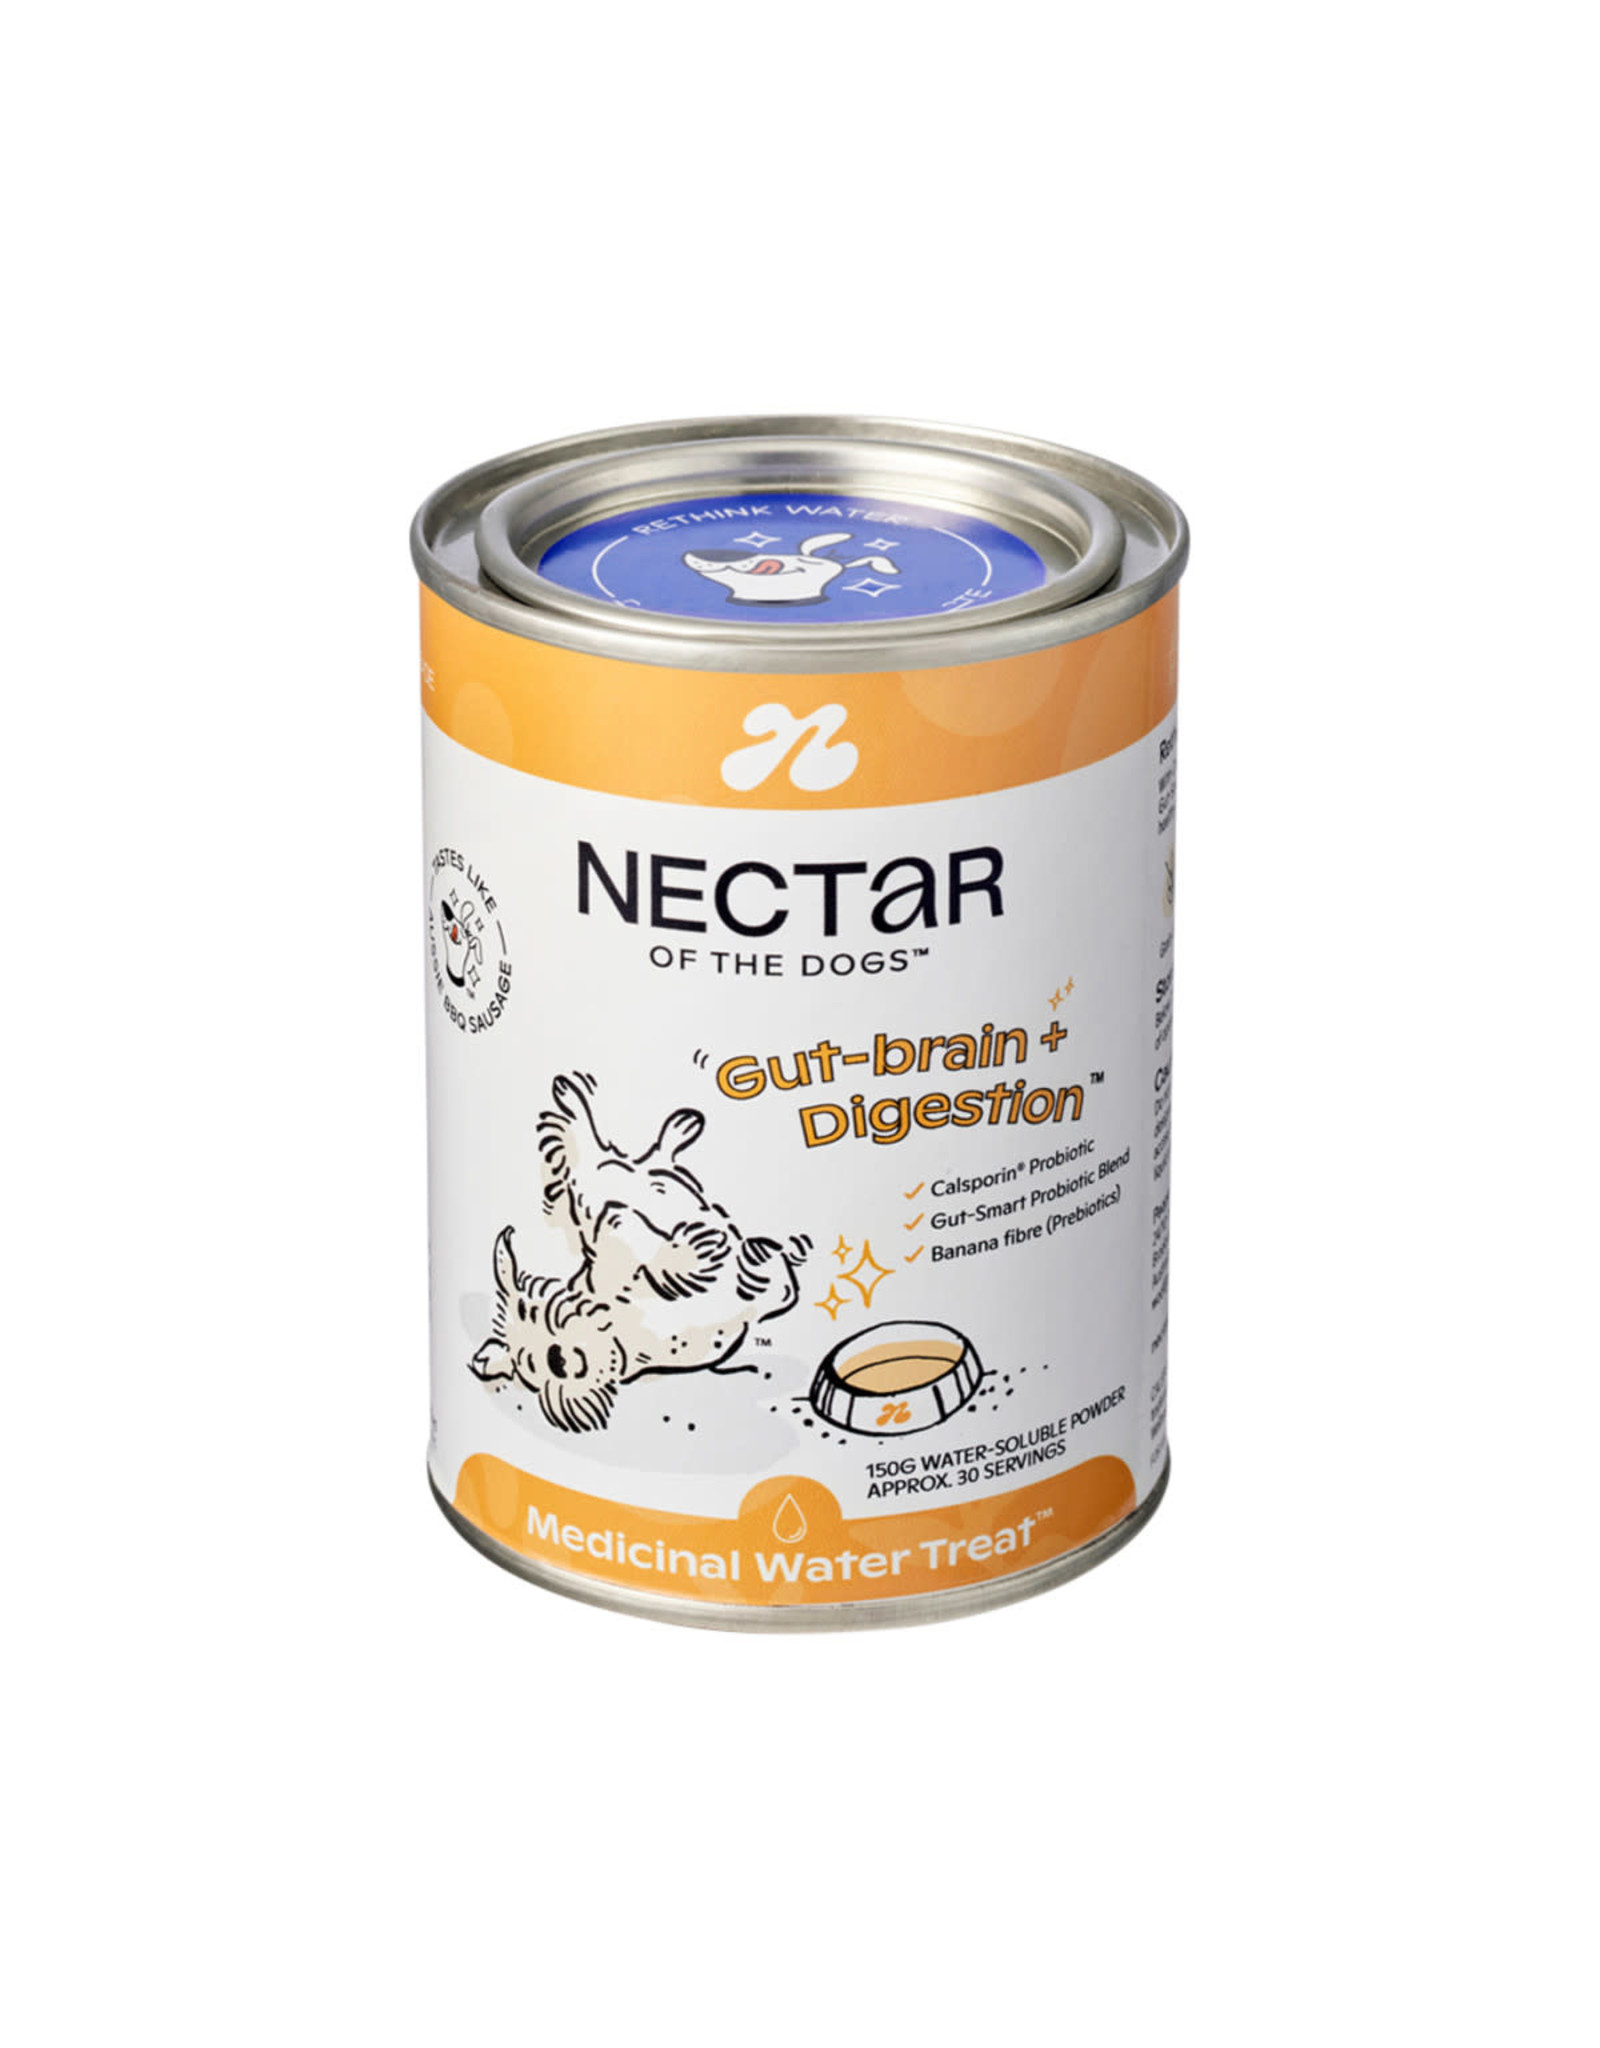 Nectar of the Dogs Gut-Brain + Digestion (Medicinal Water Treat) Soluble Powder 150g